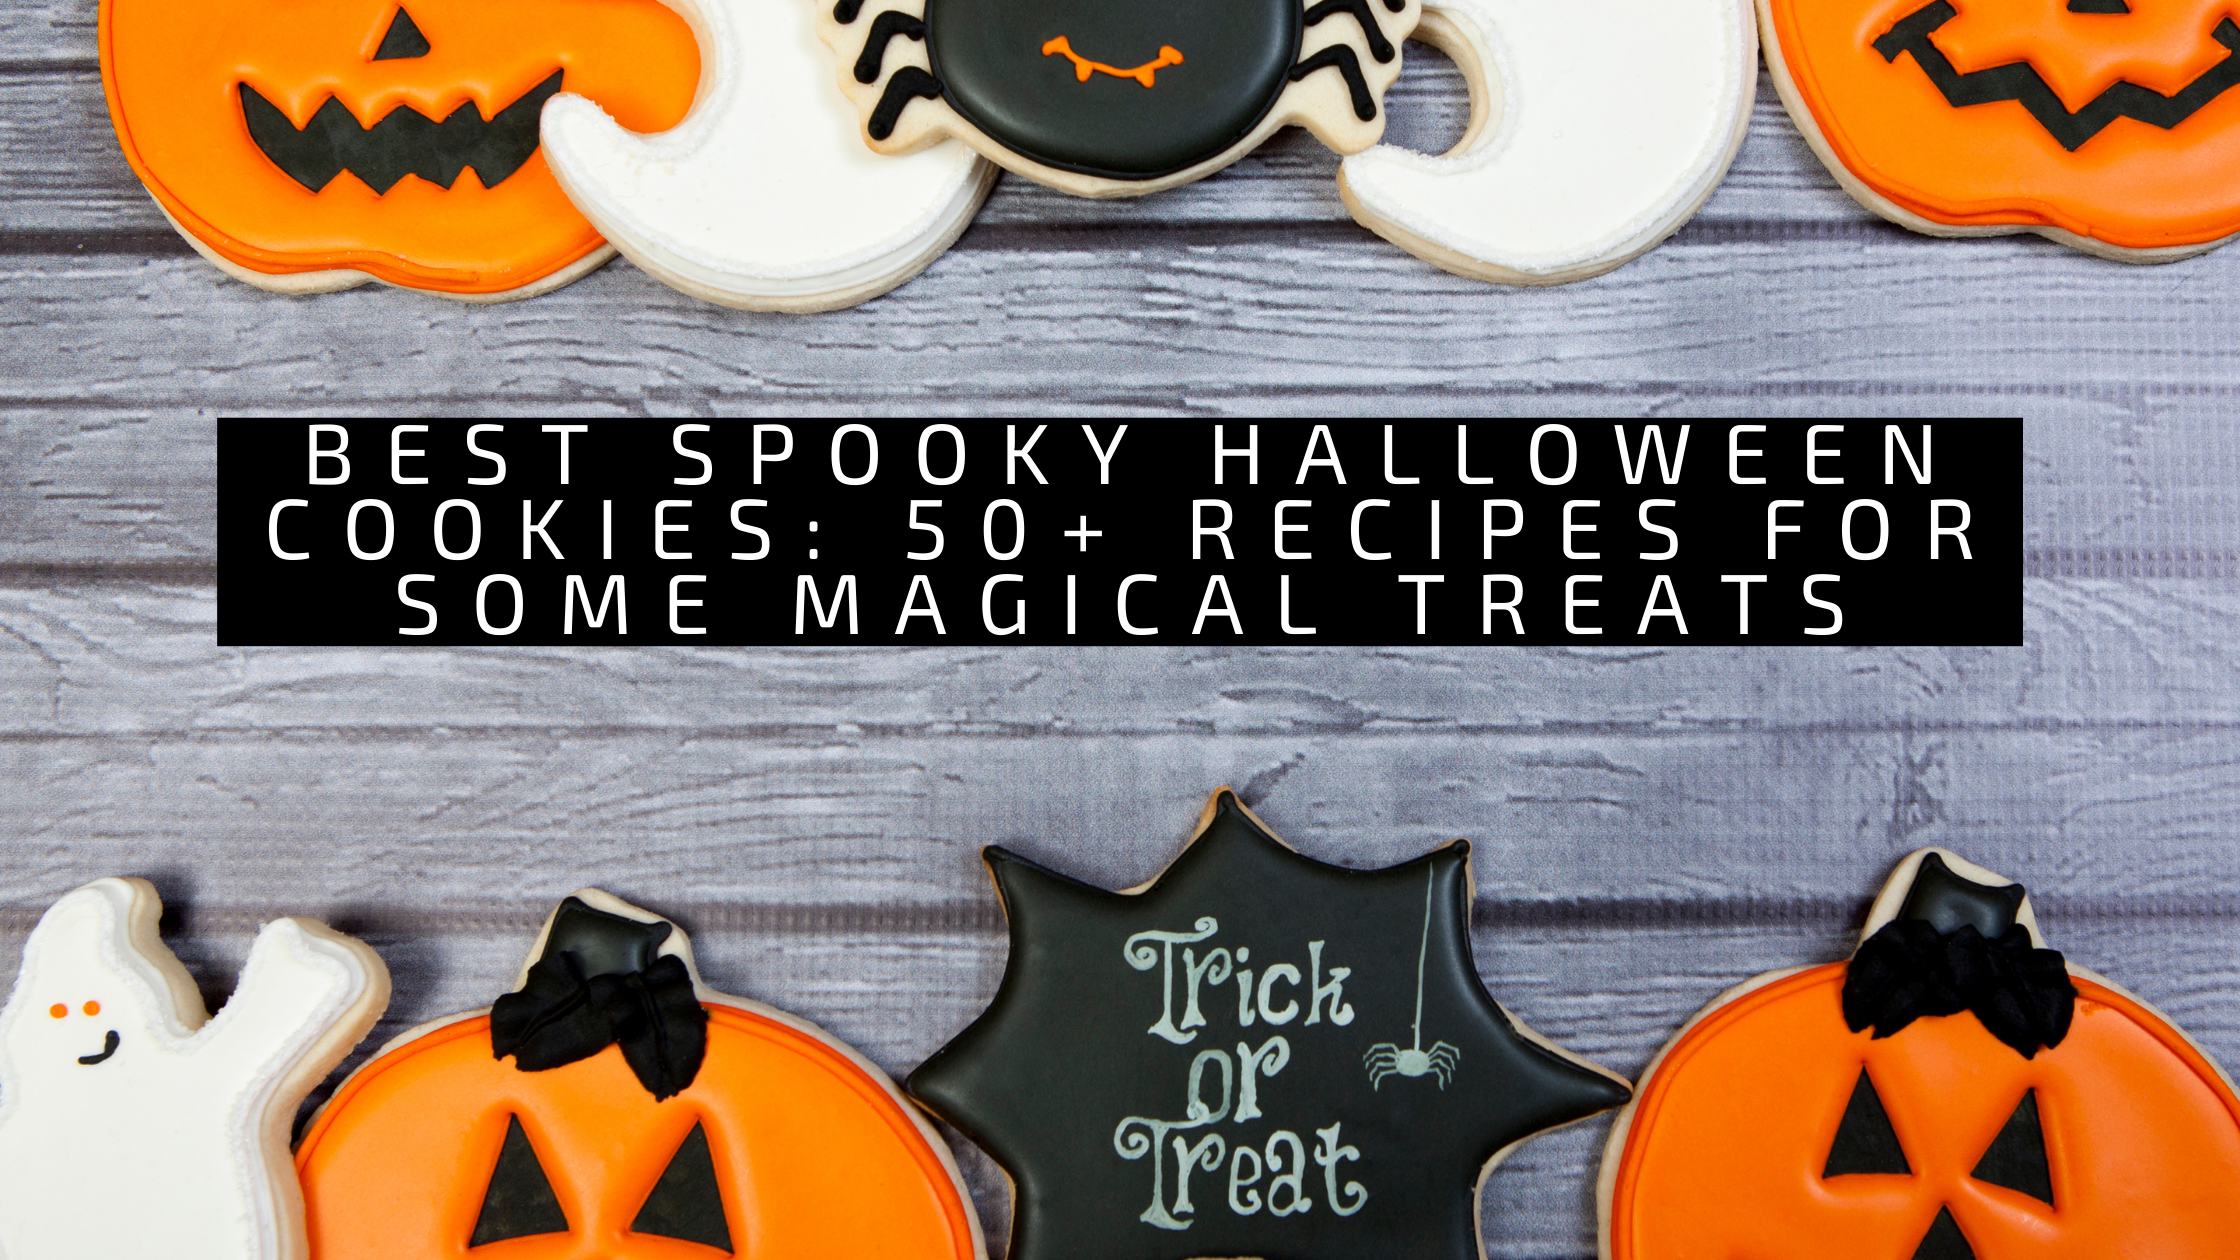 Best Spooky Halloween Cookies: 50+ Recipes for Some Magical Treats 10